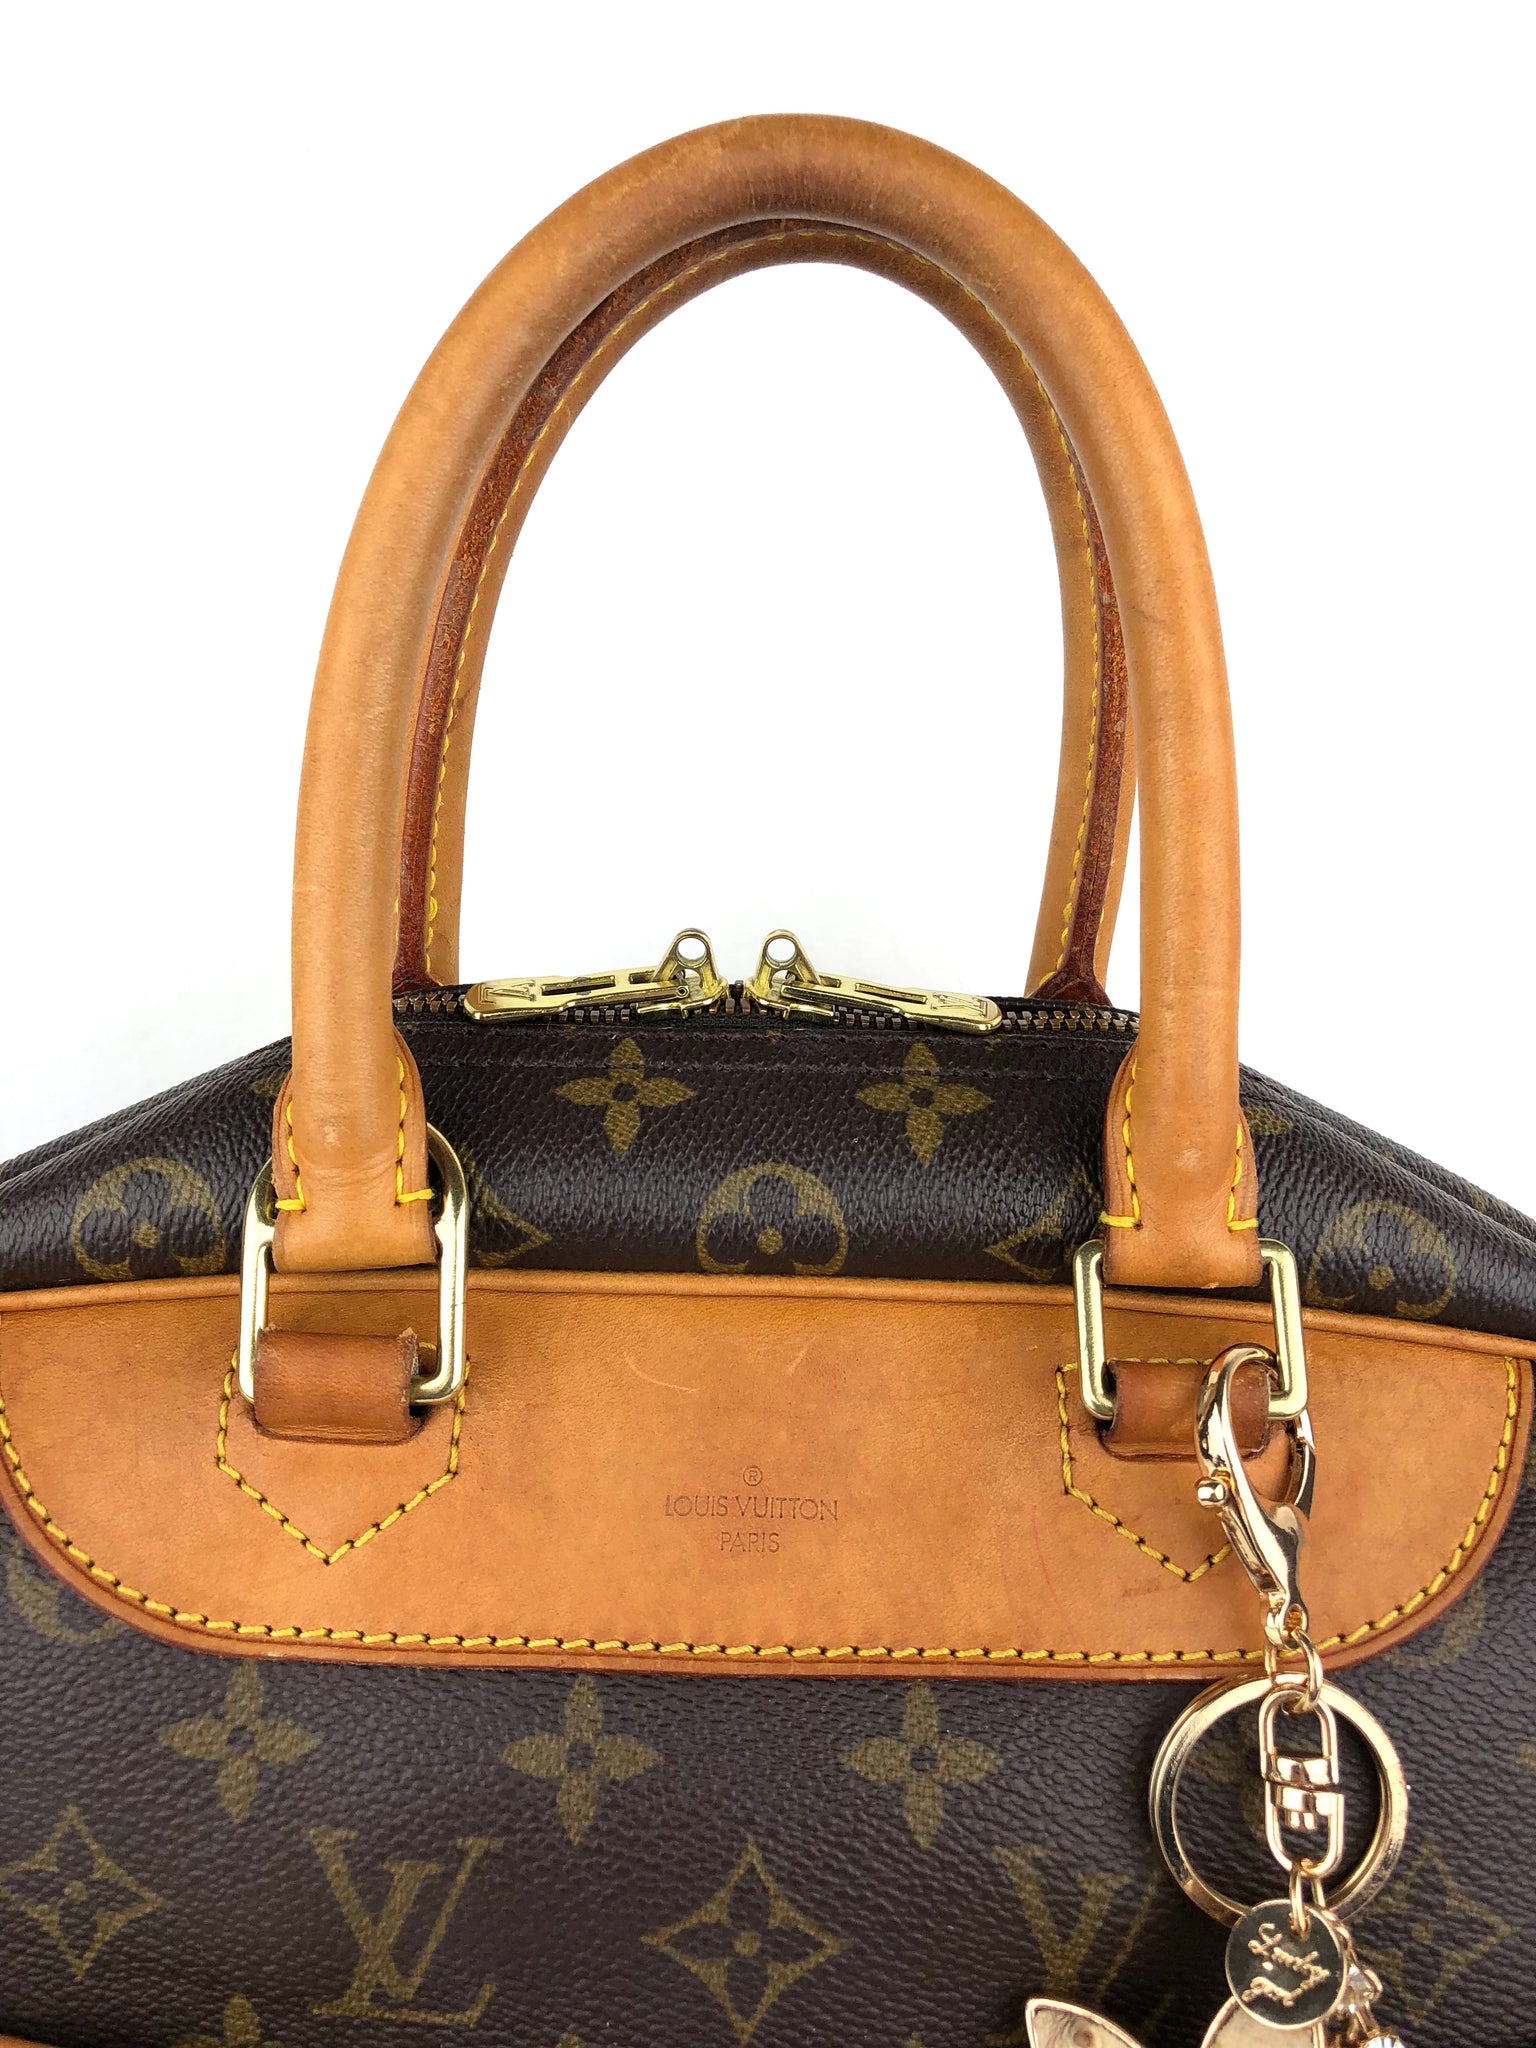 Louis Vuitton Deauville Monogram 2004 in Very Good Condition with Bag,  Dustbag, Leather Tag, Padlock and Key Harga 7.000.000 #lvdeauville